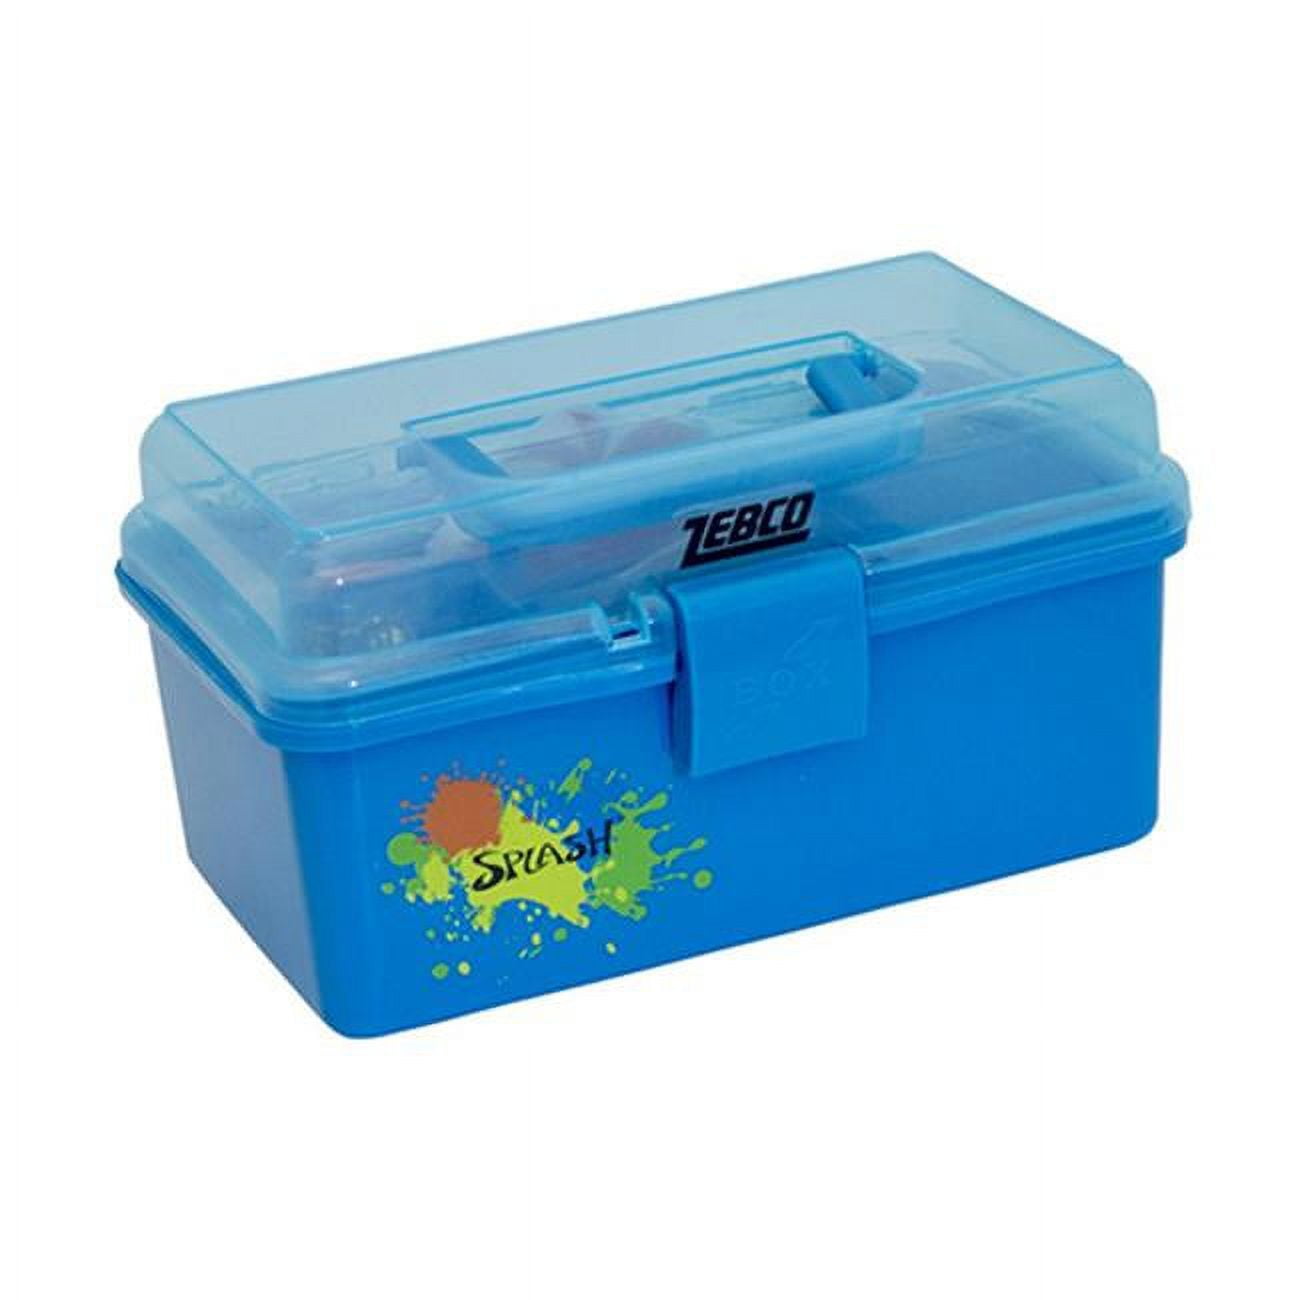 Splash Kids Tackle Box Assorted Colors with Tackle 